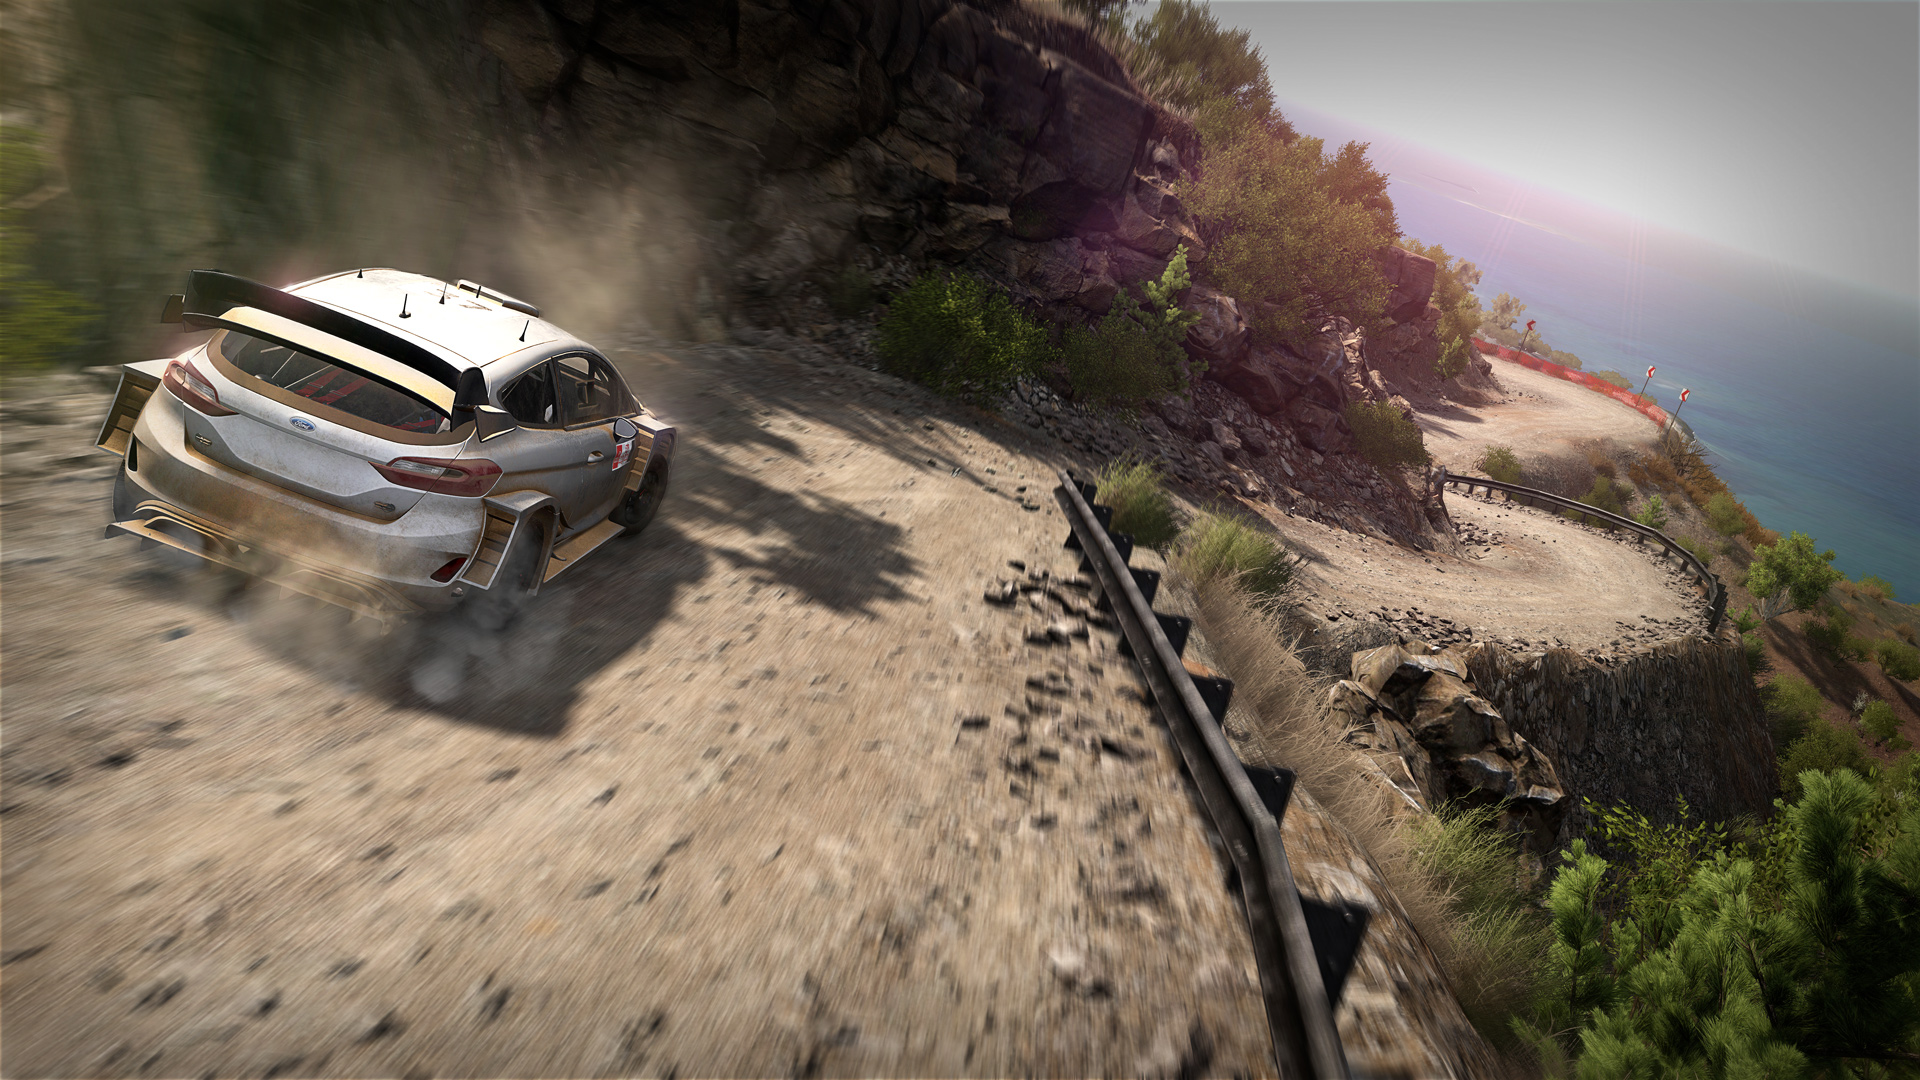 download wrc 8 steam for free